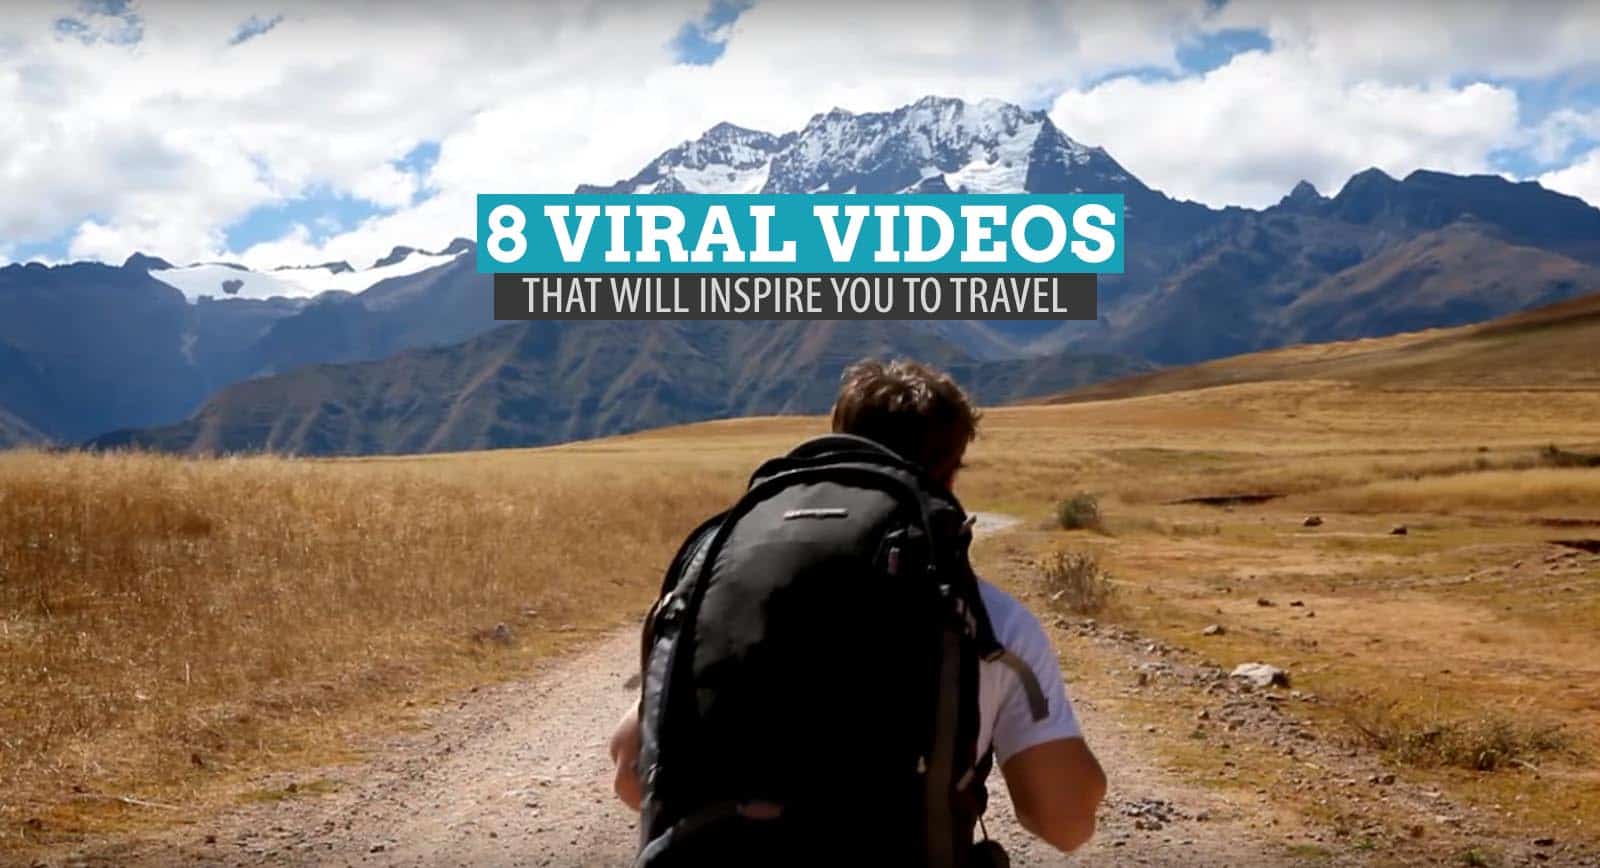 Get Inspired: 8 Viral Videos that Will Inspire You to Travel